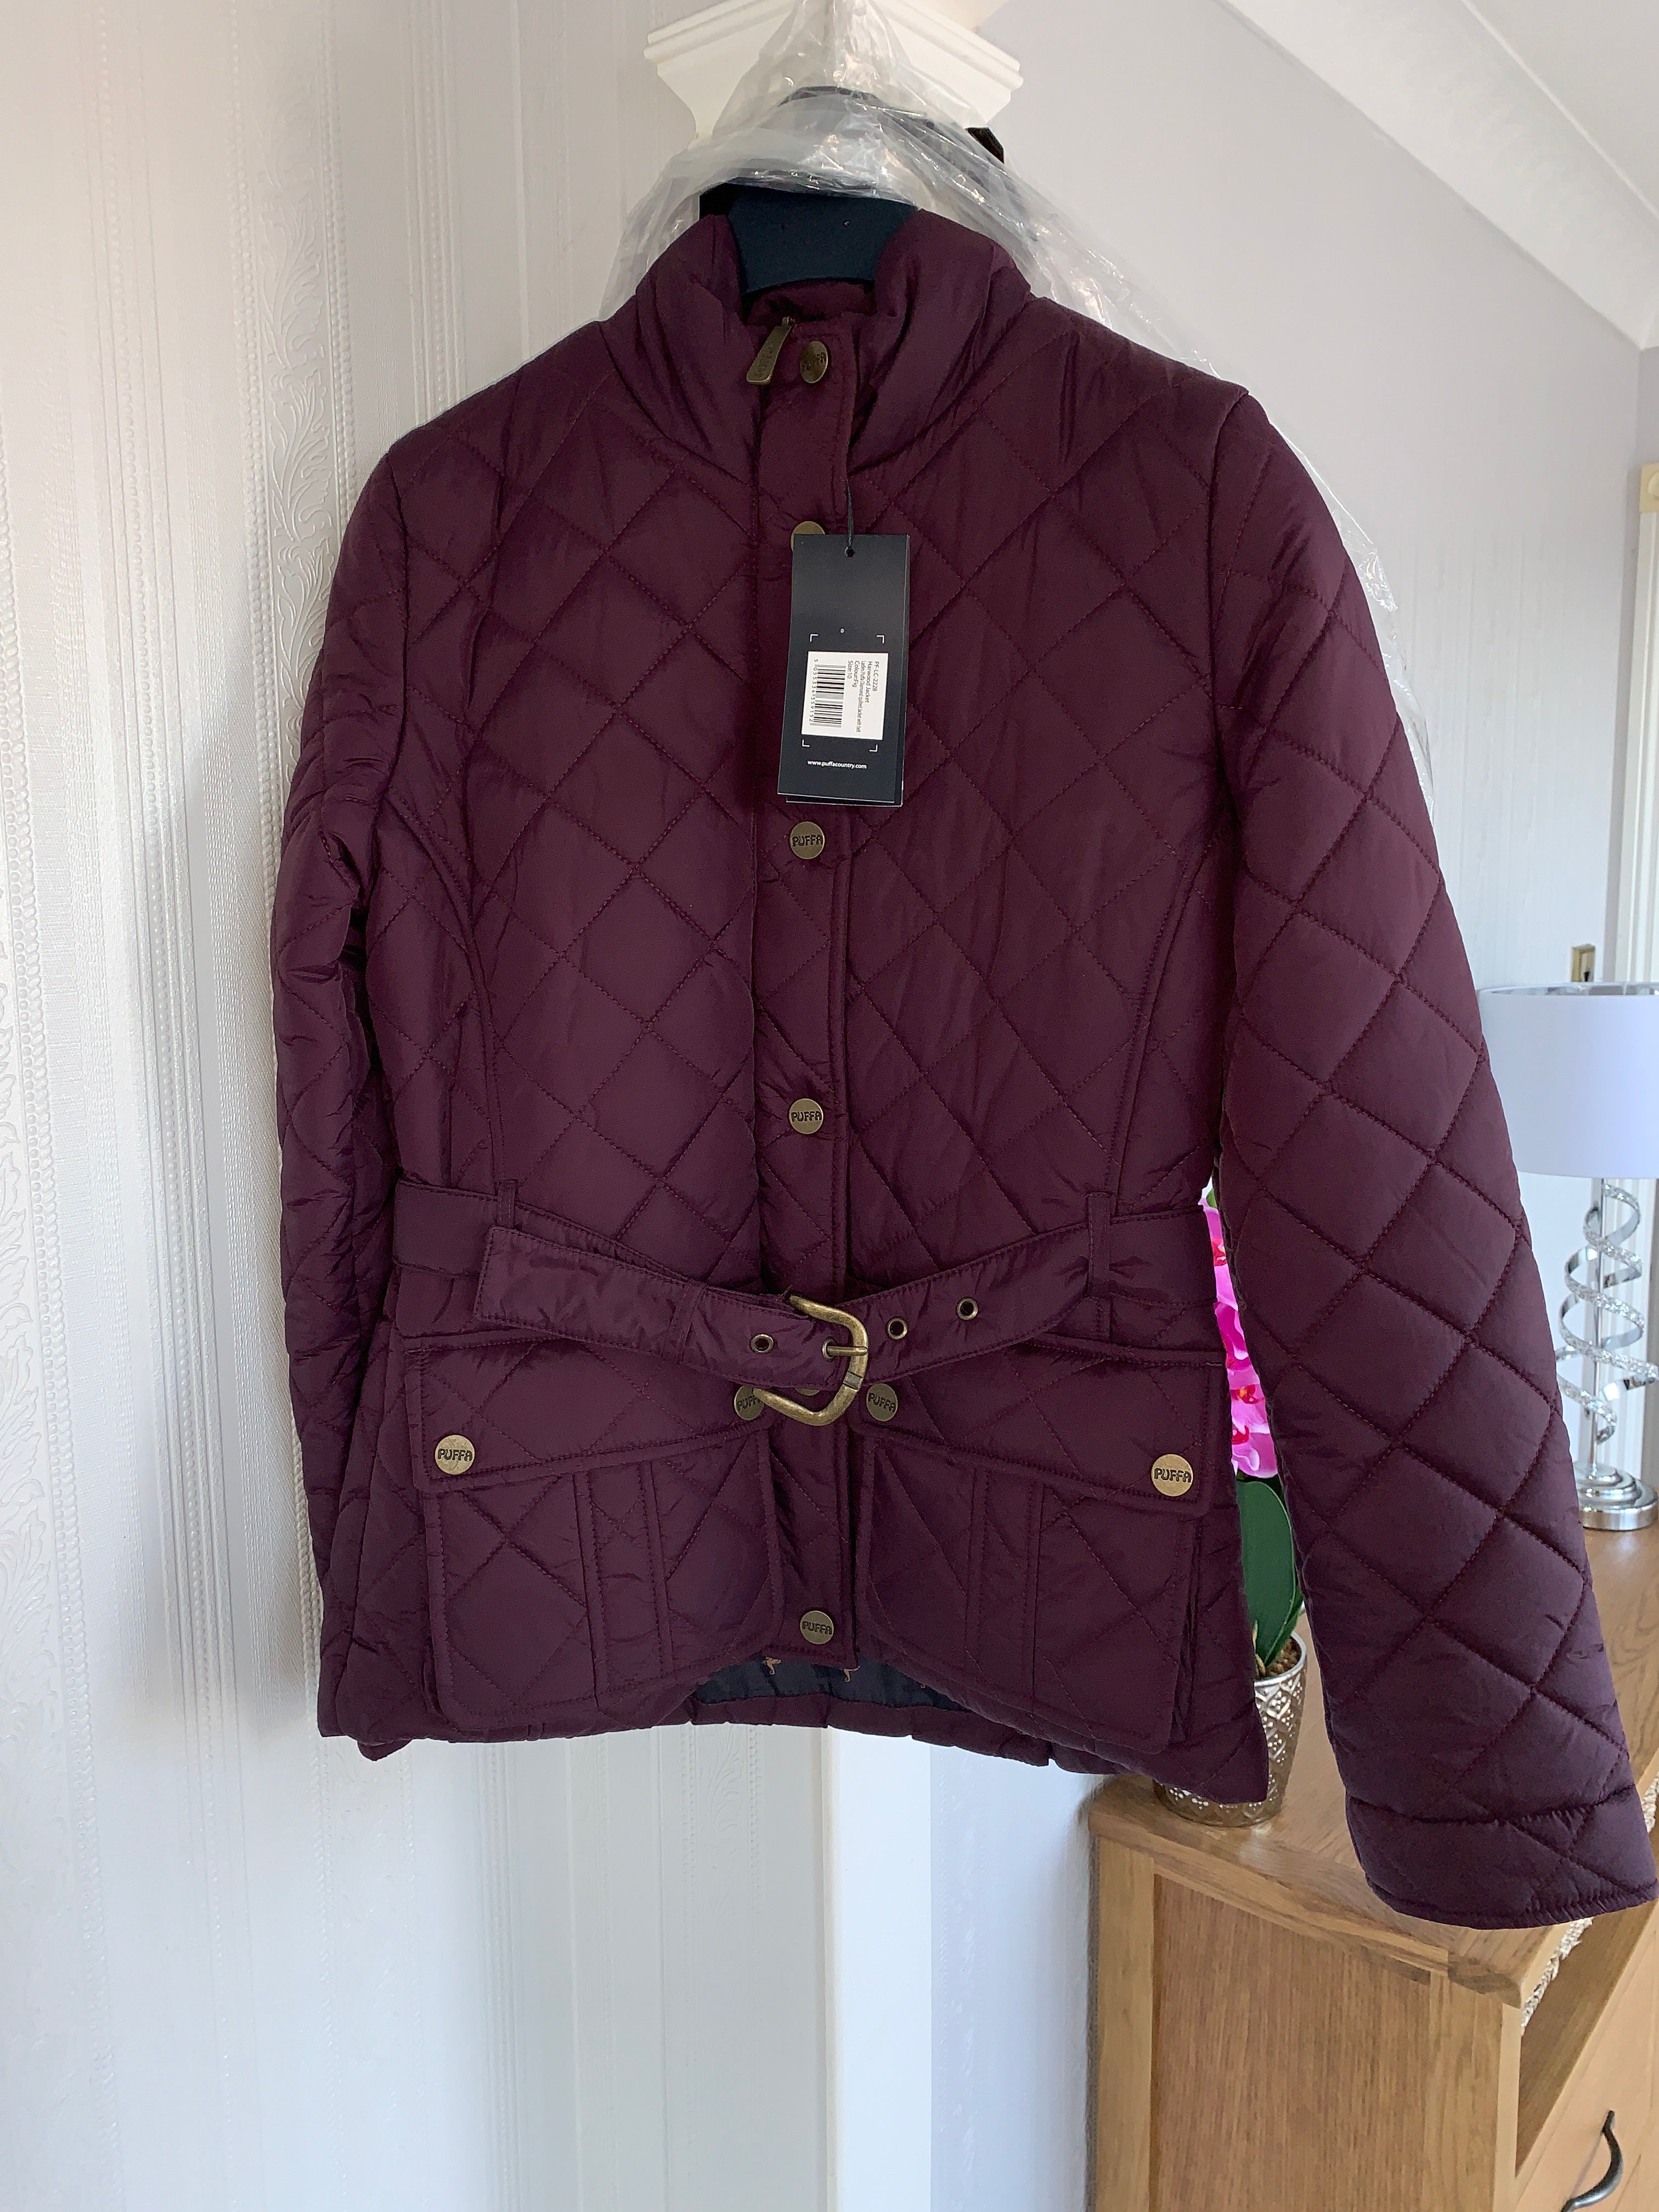 Puffa Fig Quilted Belted Country Jacket - Size 10